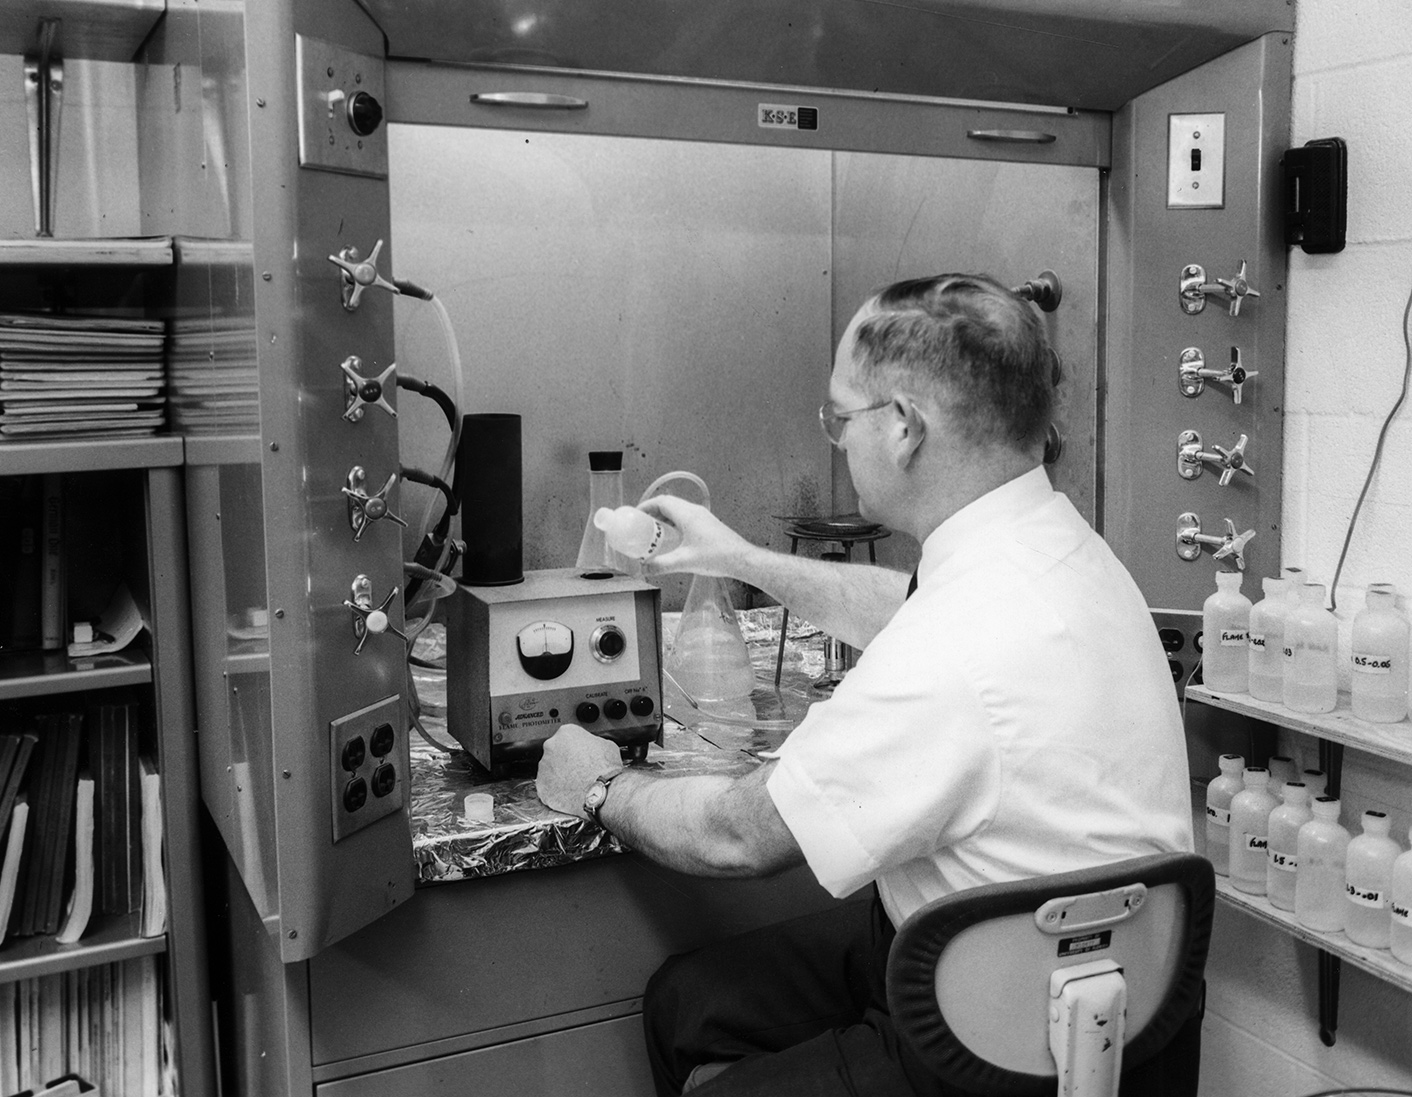 Man conducts testing on a device in a laboratory